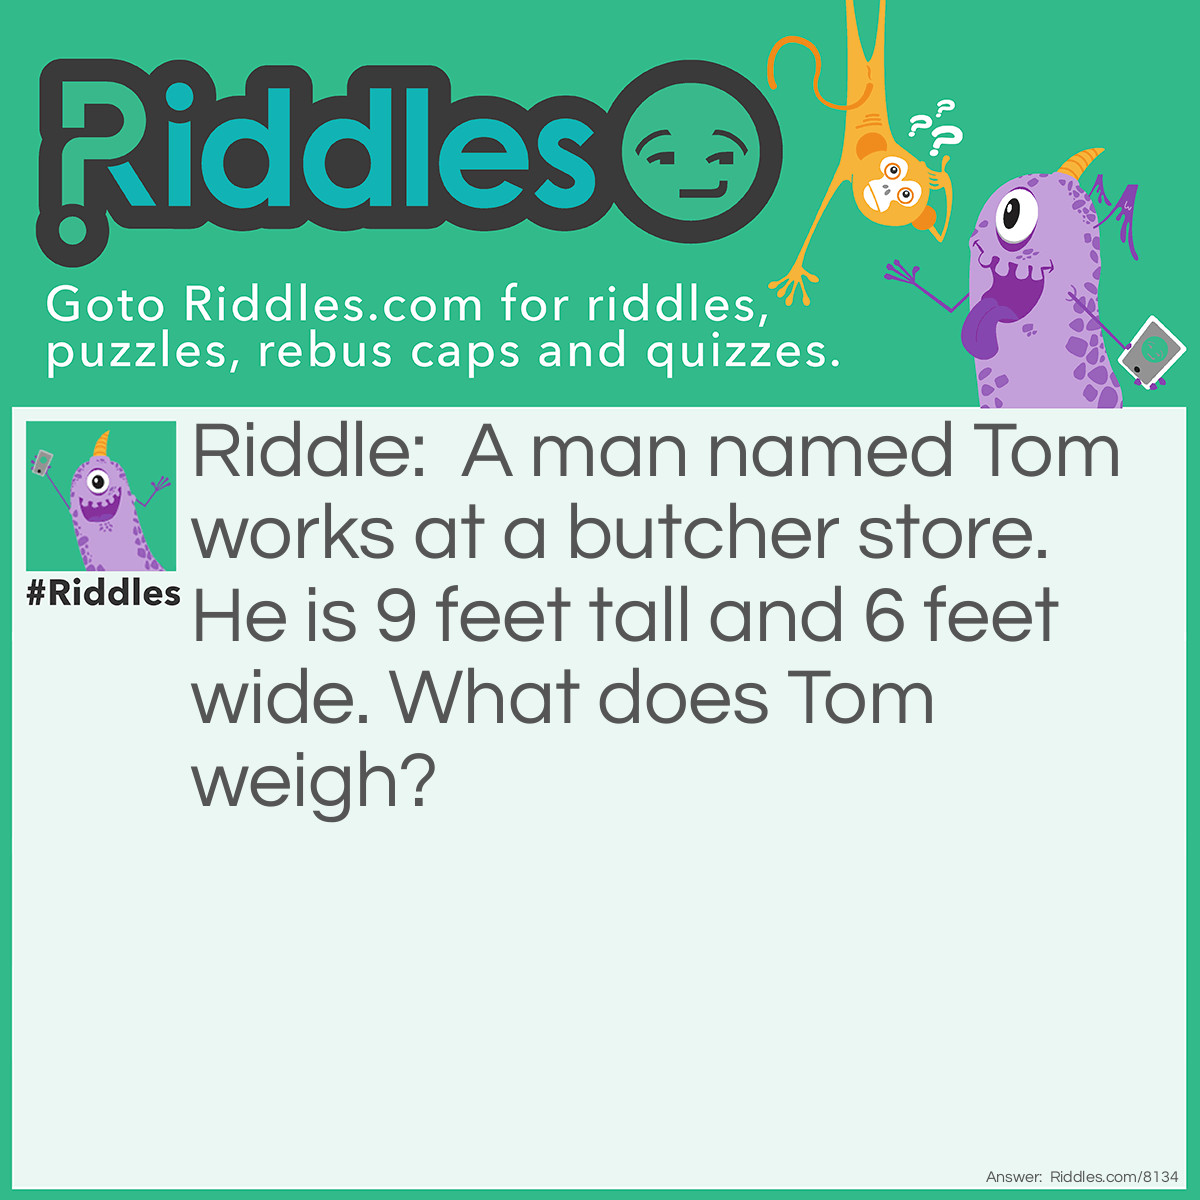 Riddle: A man named Tom works at a butcher store. He is 9 feet tall and 6 feet wide. What does Tom weigh? Answer: He weighs meat. A butcher weighs meat to get the amount the buyer wants.